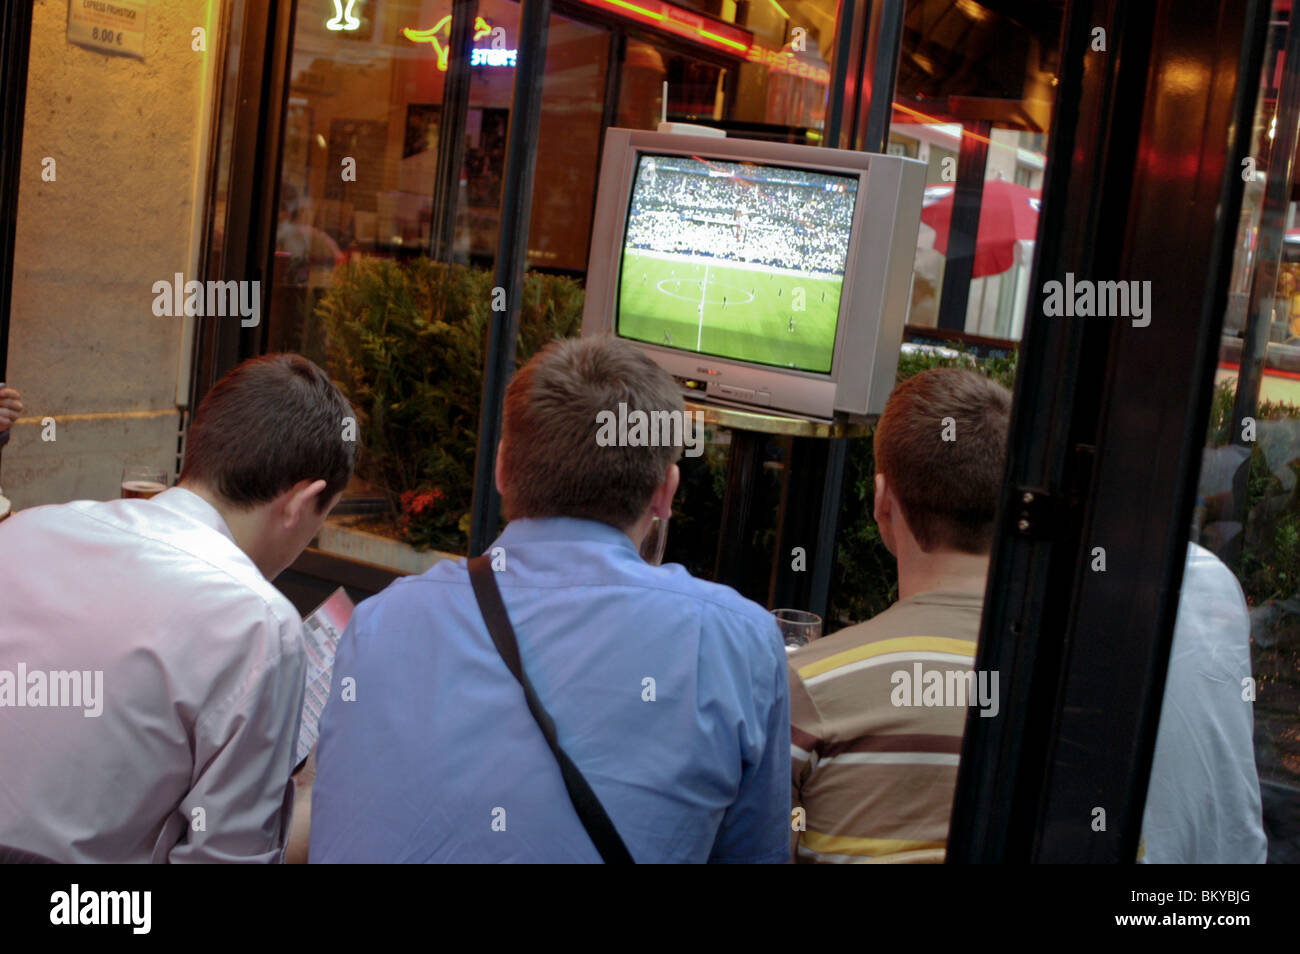 group of friends on holiday city , Young Adults inside Bar, Paris, France, Looking at  Soccer Match on T.V. Screen, busy pub local neighborhood bar interior Stock Photo